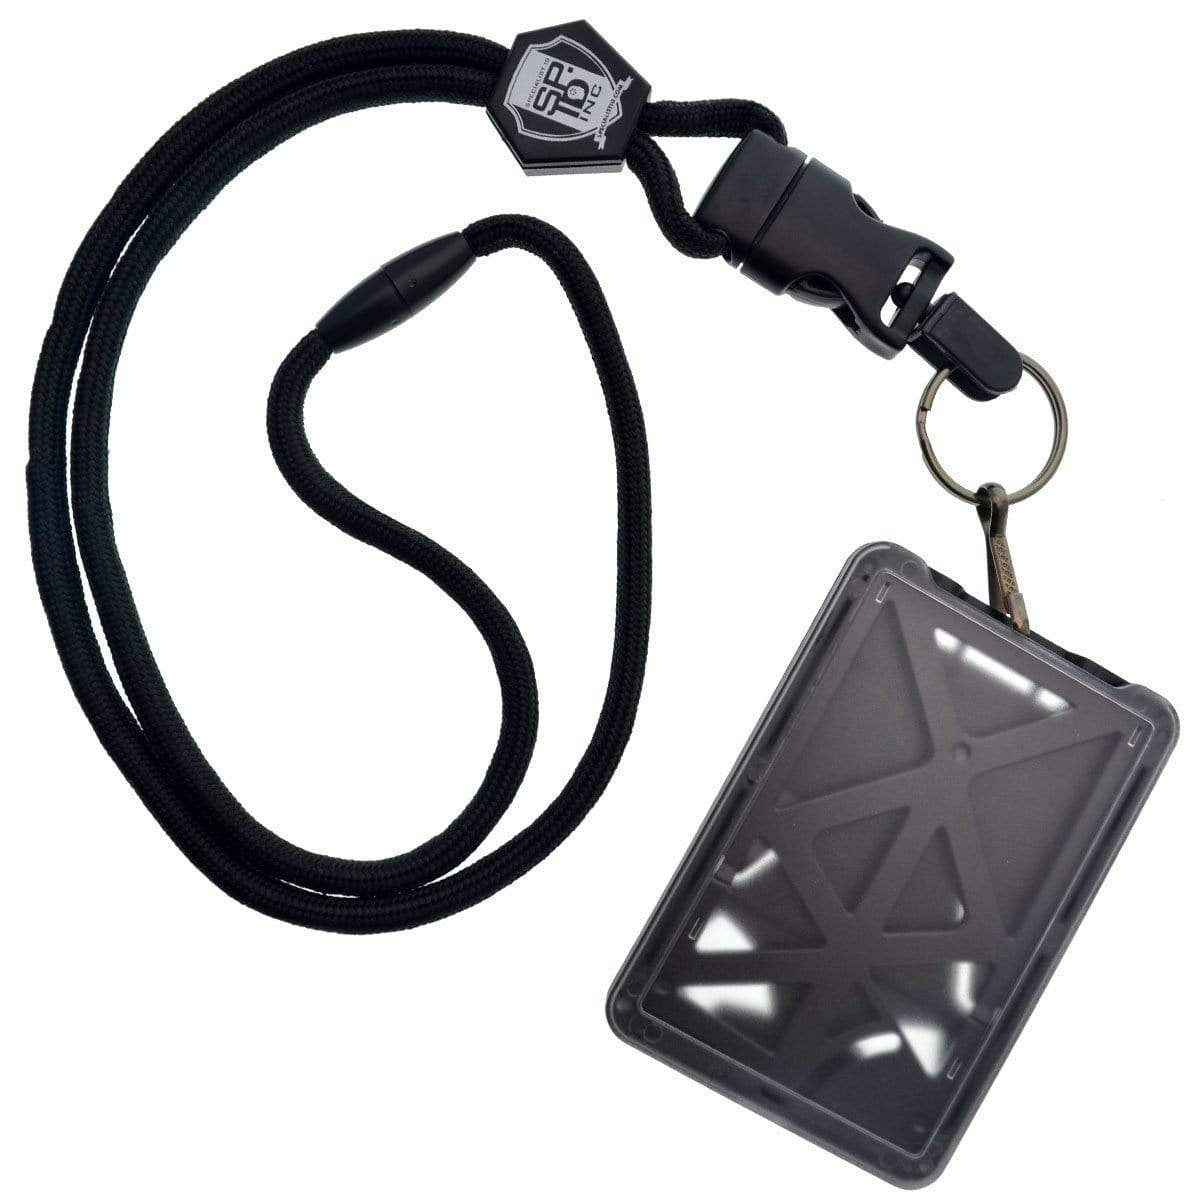 Lanyards for ID Badge